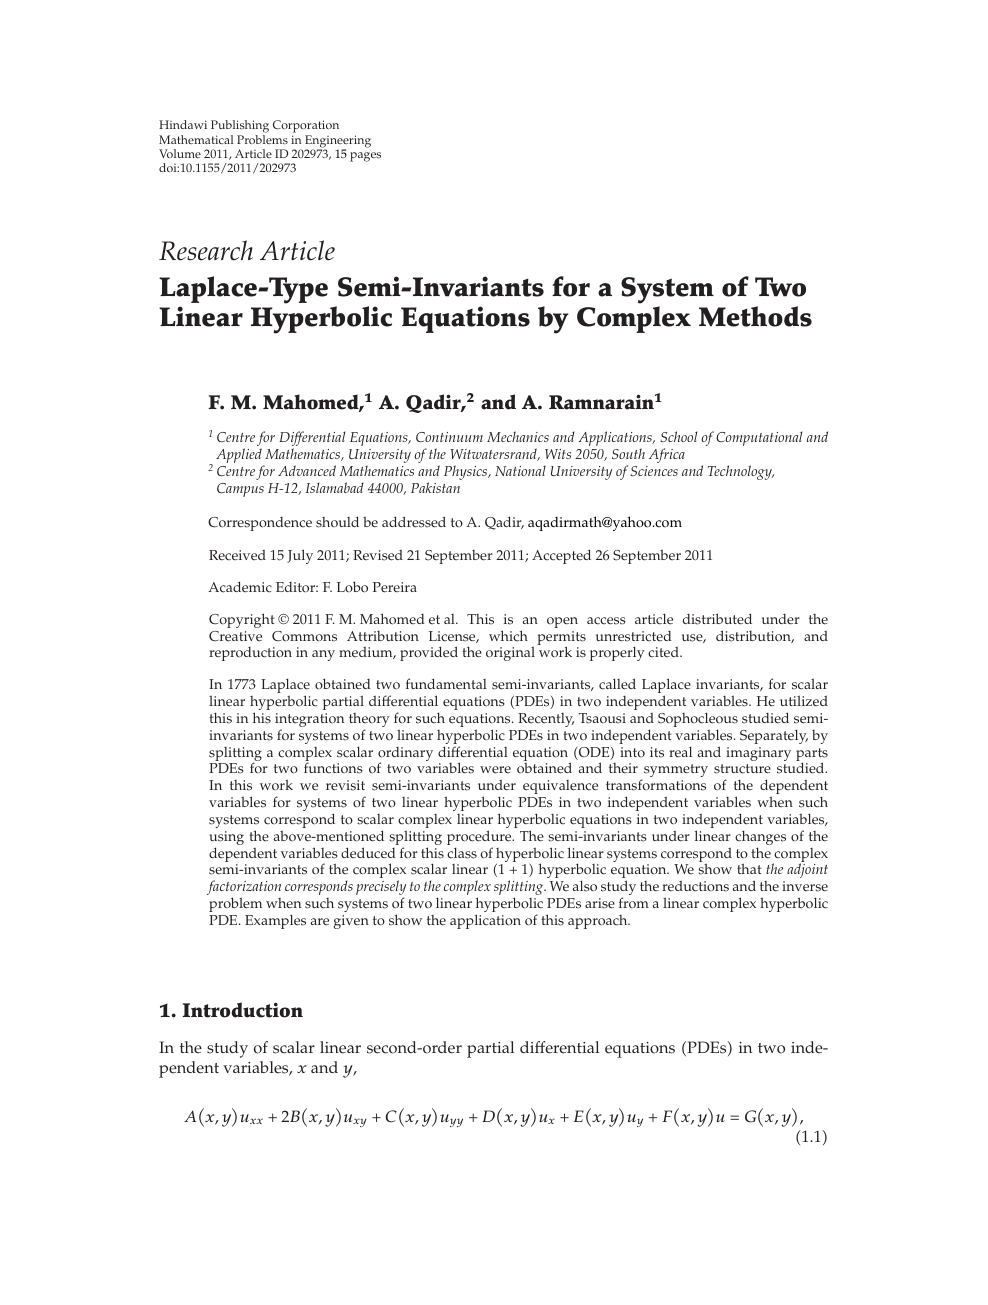 Laplace Type Semi Invariants For A System Of Two Linear Hyperbolic Equations By Complex Methods Topic Of Research Paper In Mathematics Download Scholarly Article Pdf And Read For Free On Cyberleninka Open Science